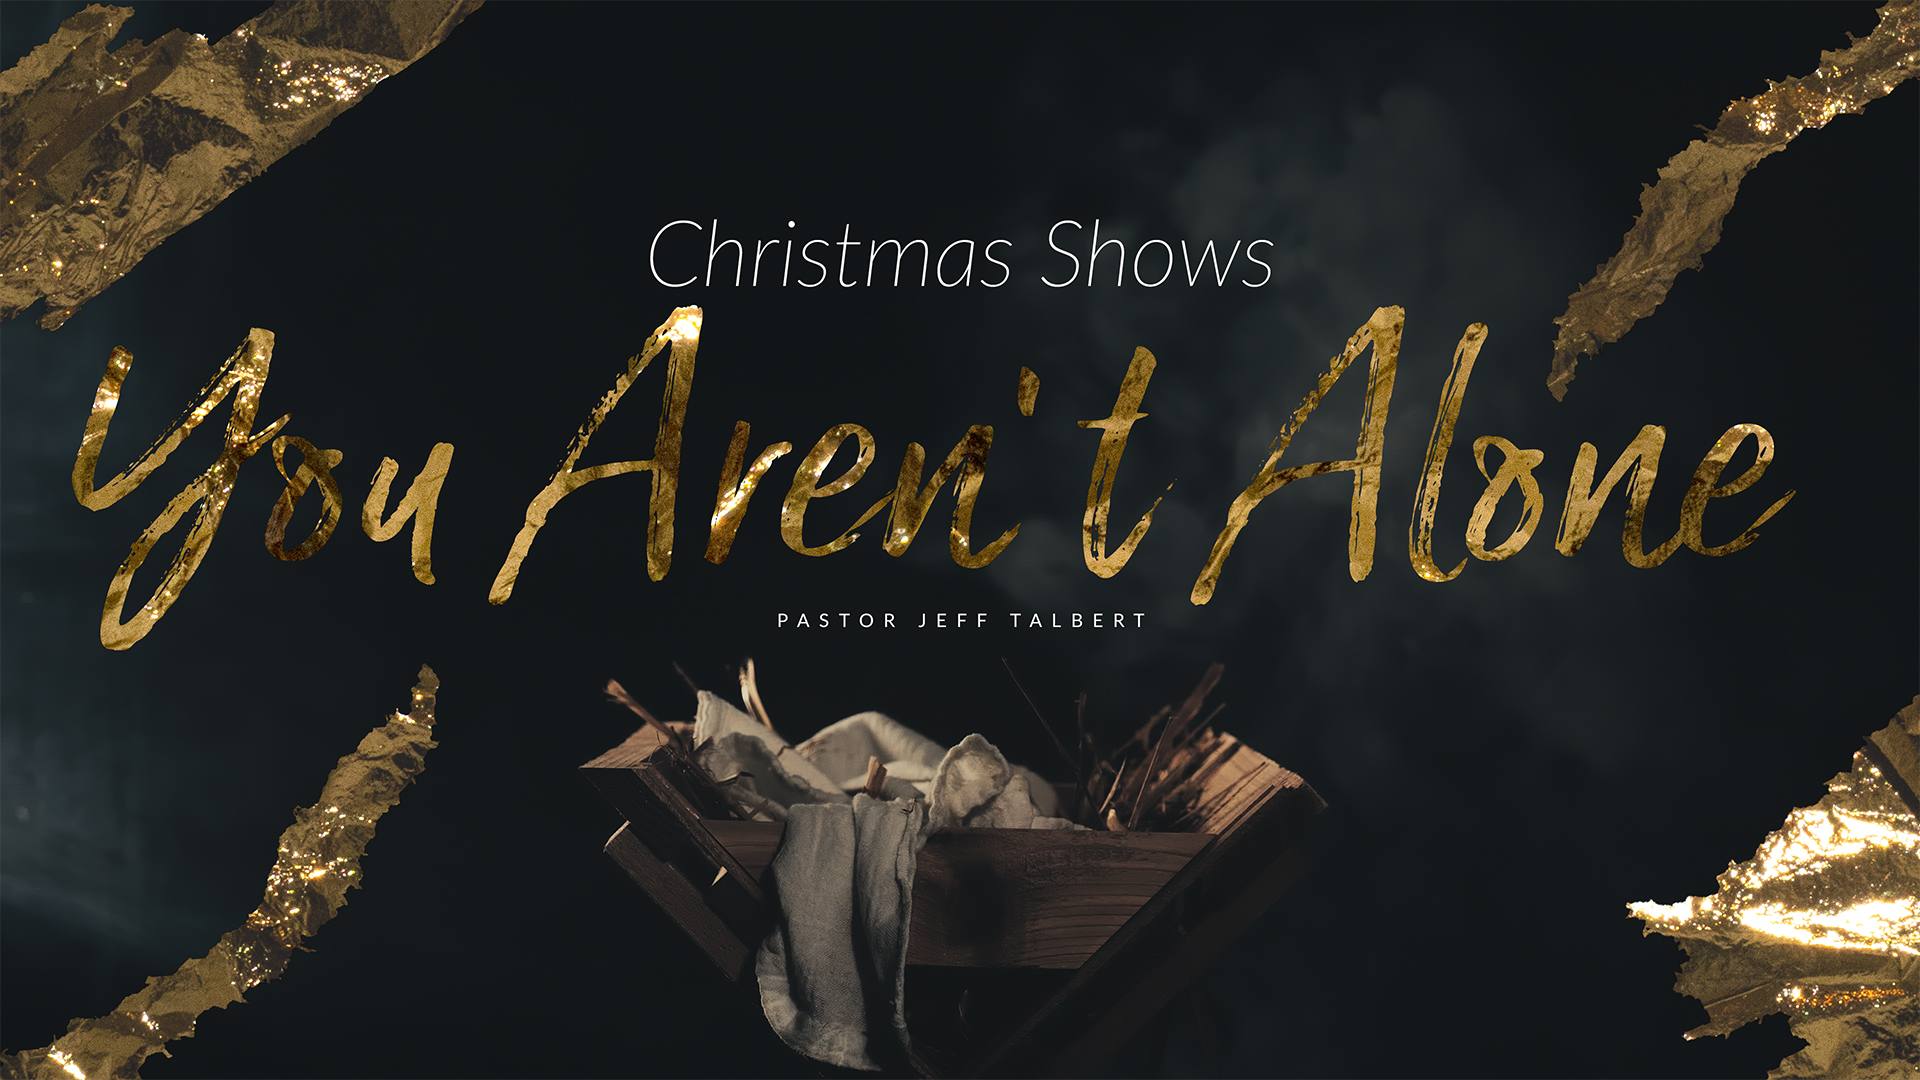 Christmas Shows You're Not Alone Image